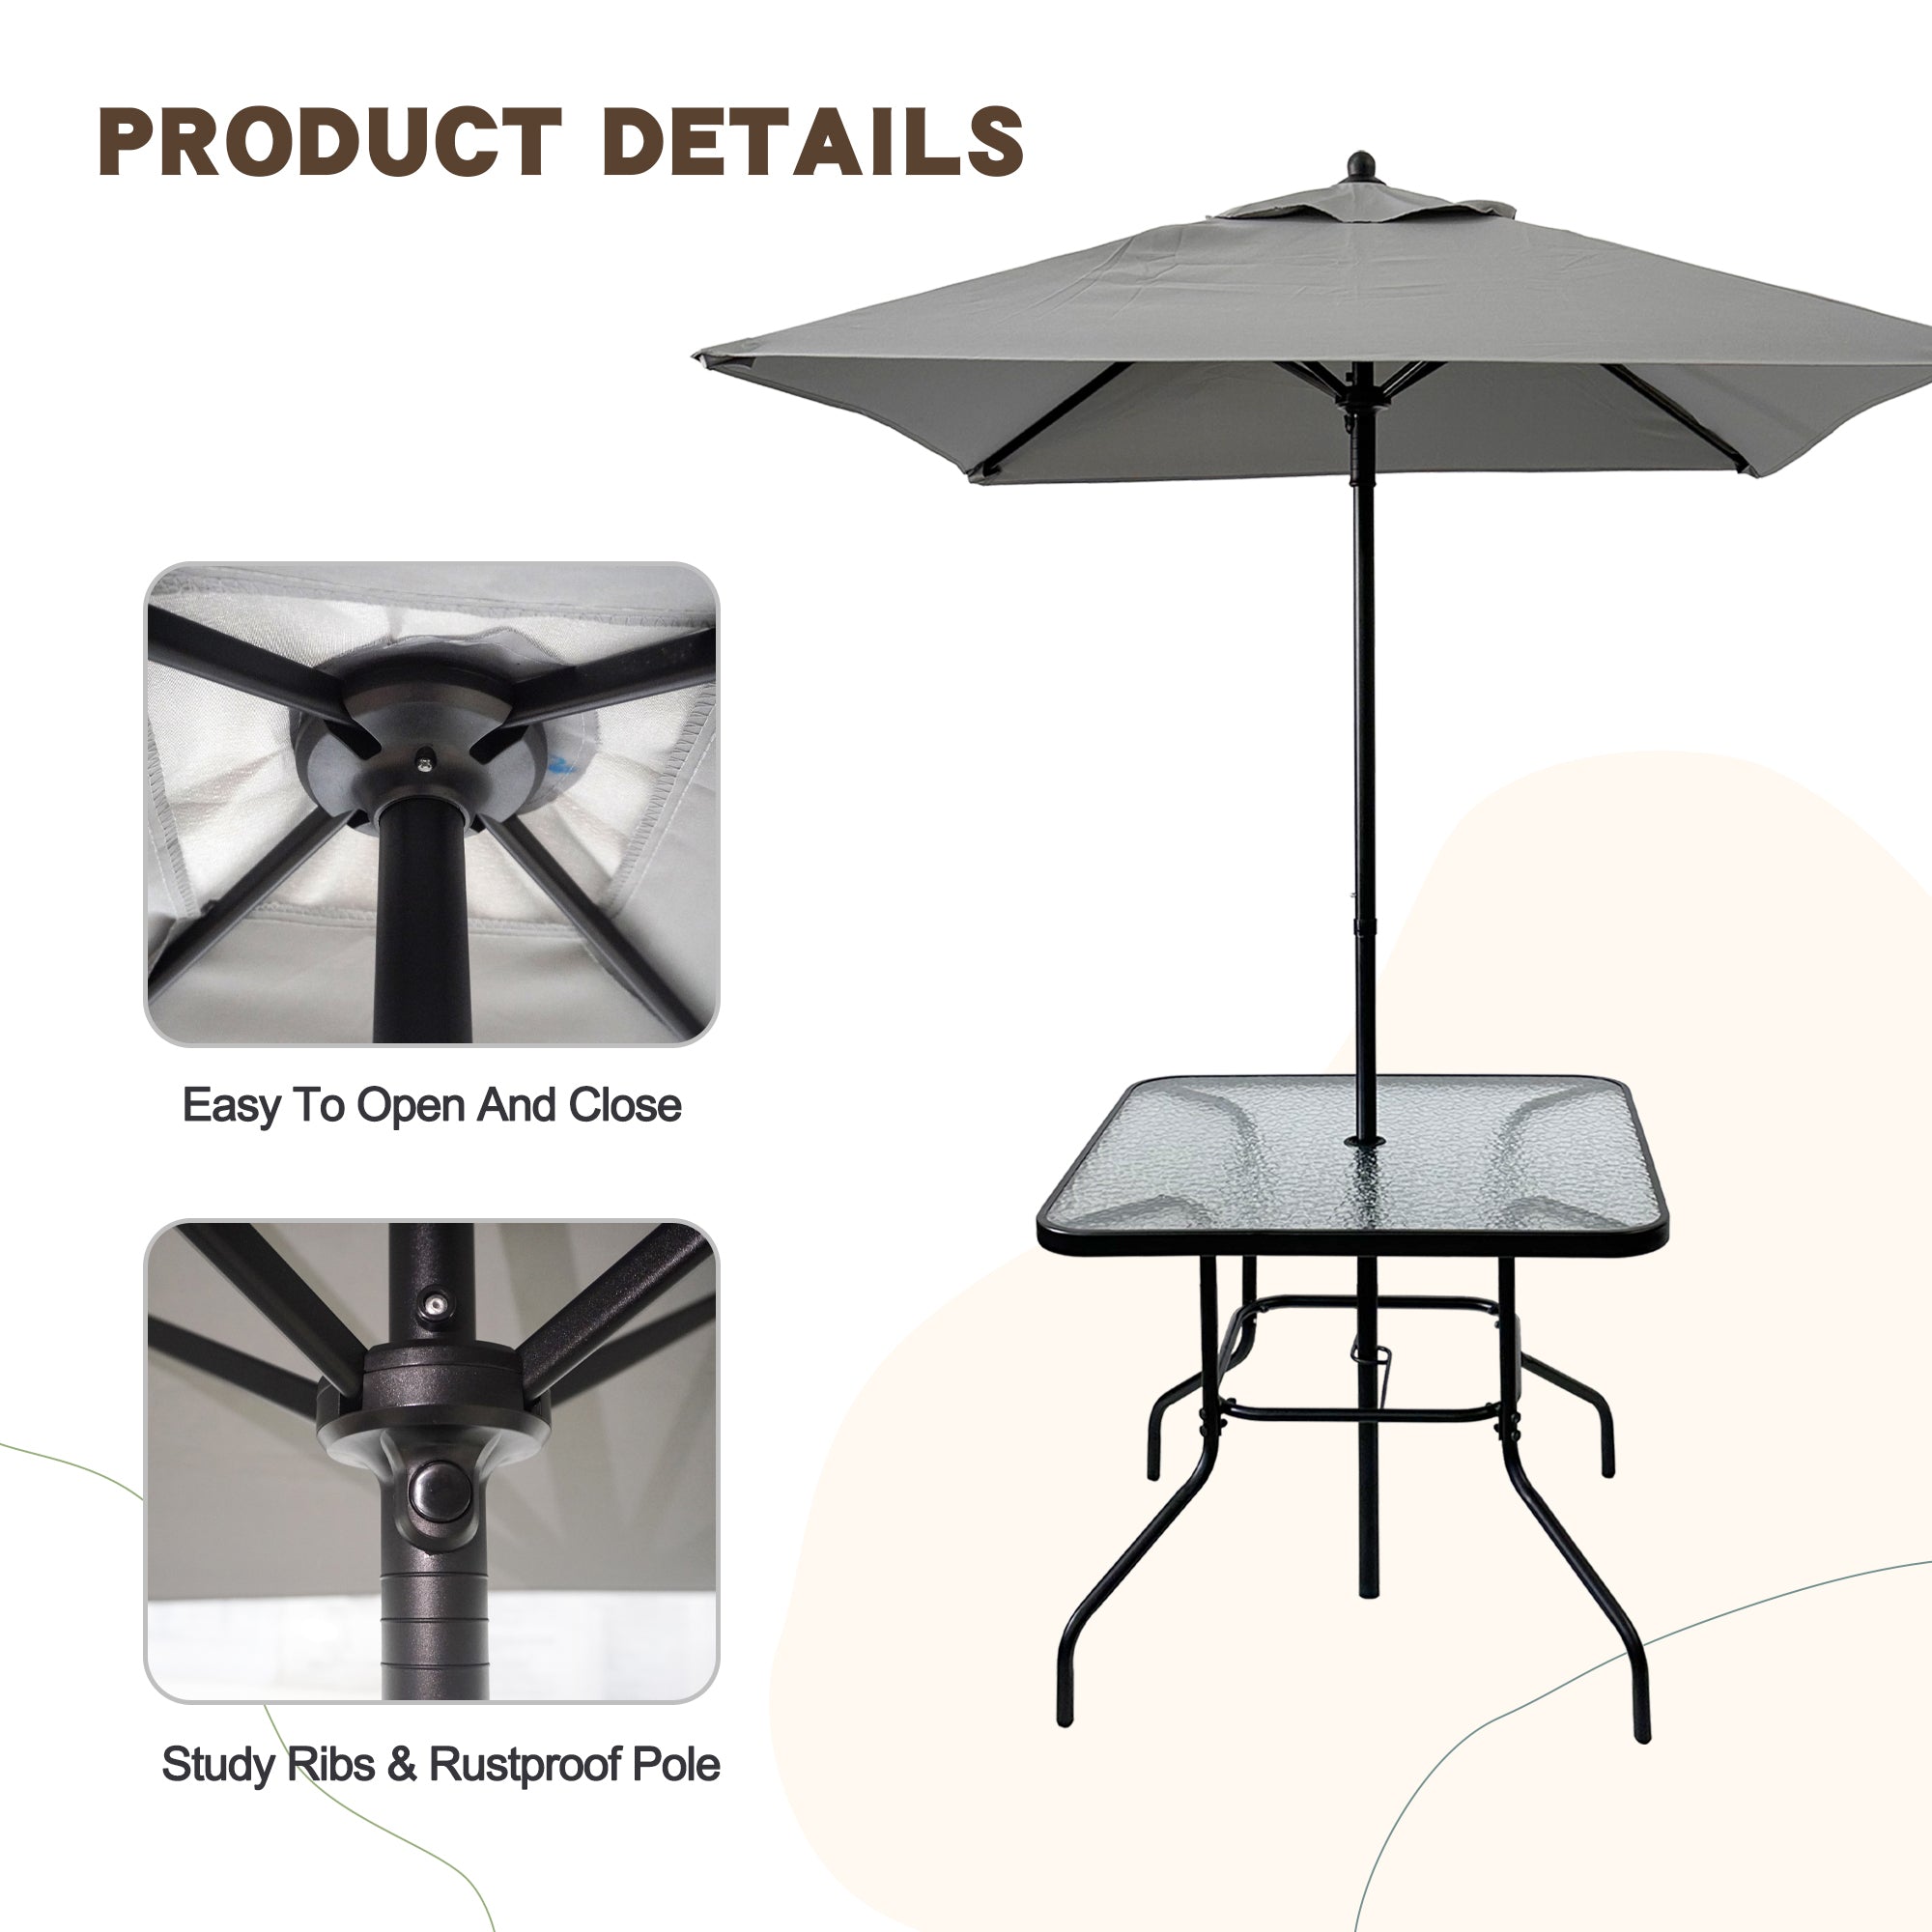 Outdoor Patio Dining Set for 4 People, Metal Patio Furniture Table and Chair Set with Umbrella, Black